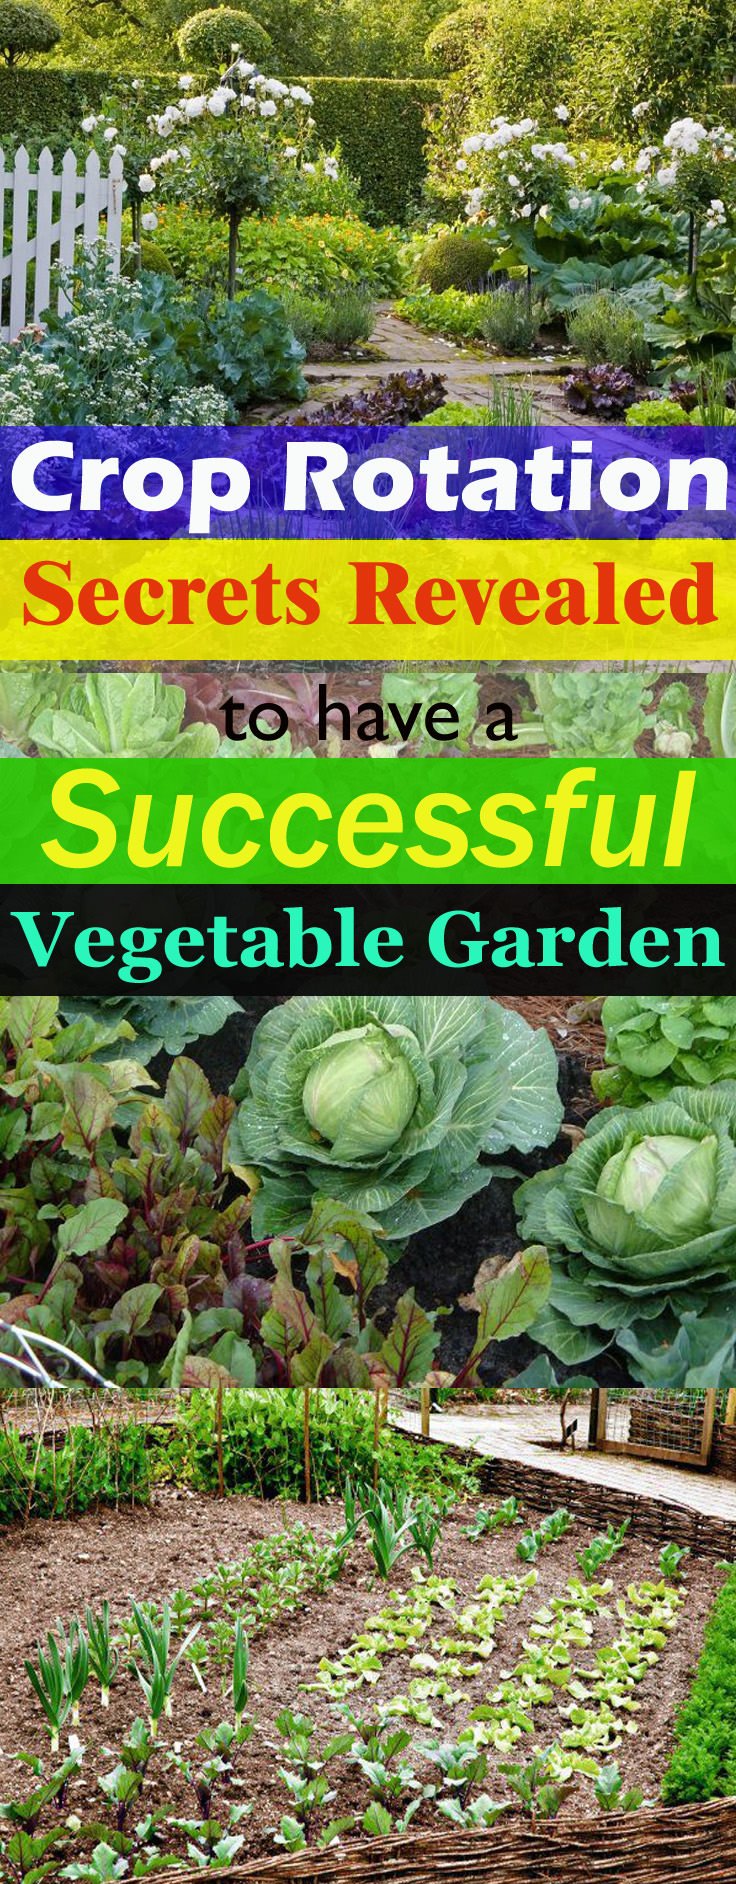 If you want to have a successful and most productive VEGETABLE garden, do crop rotation. Learn everything you need to know about it in this informative guide!